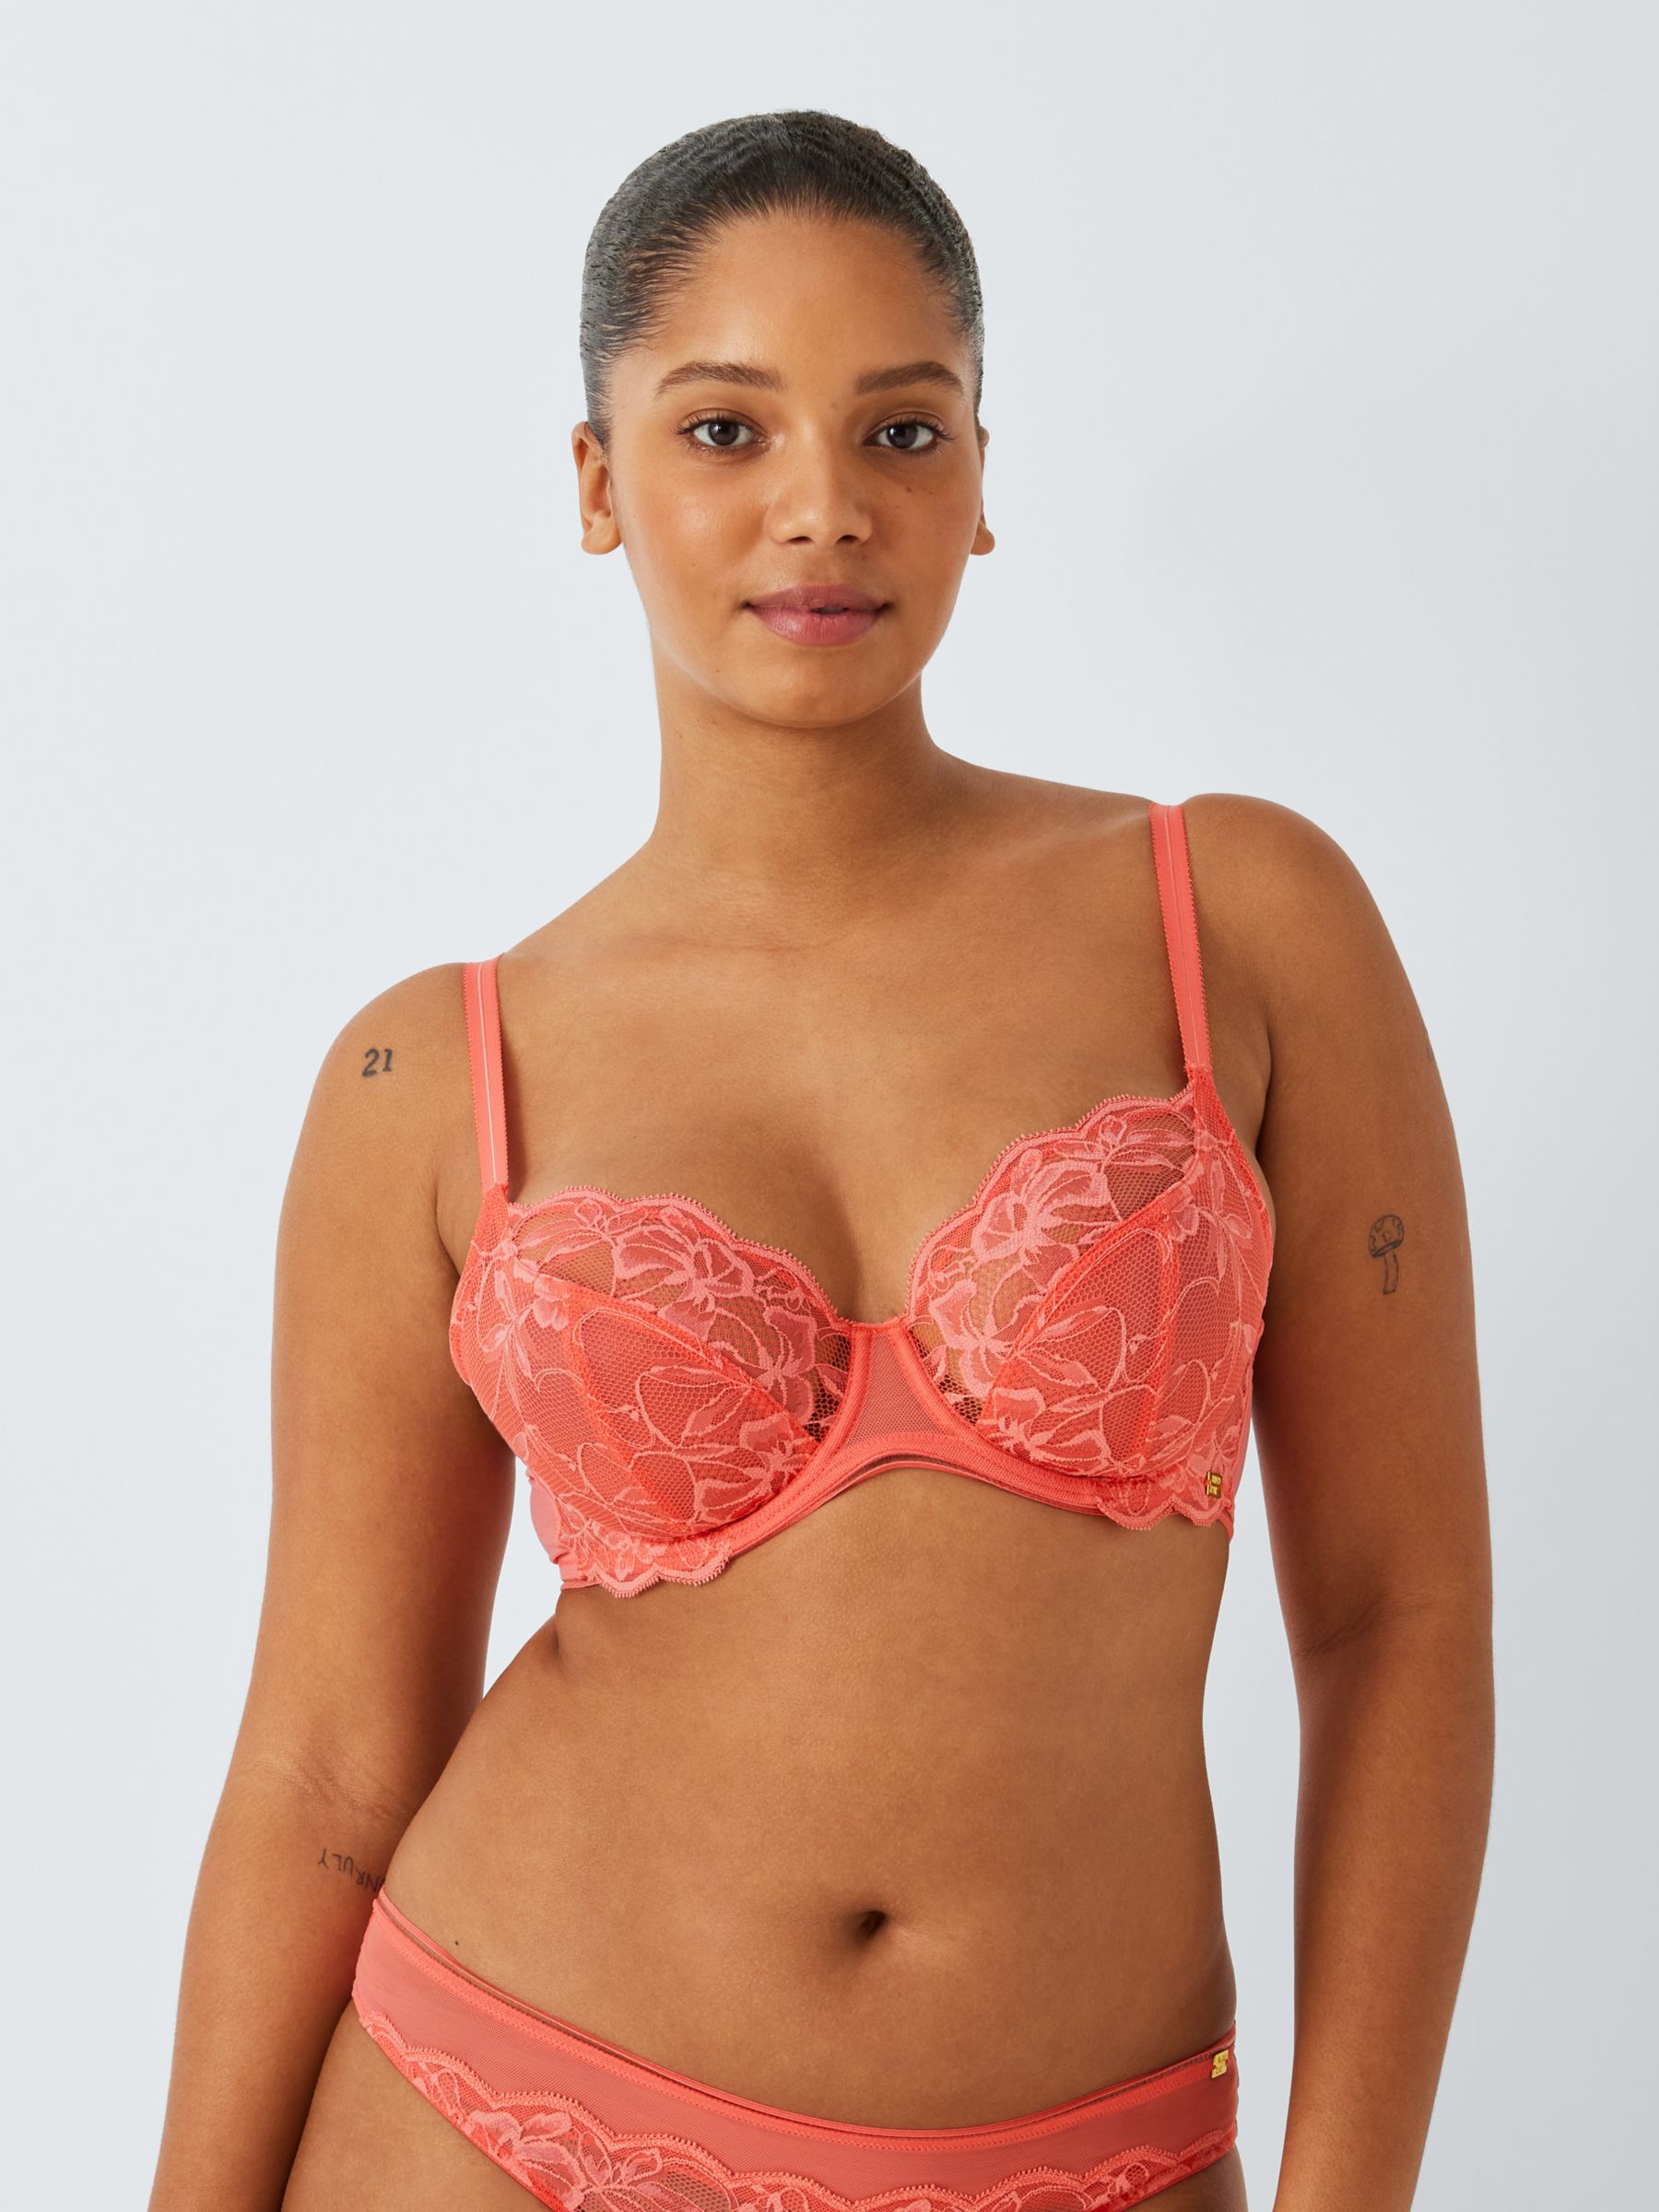 Non-Padded Bra - The online shopping beauty store. Shop for makeup